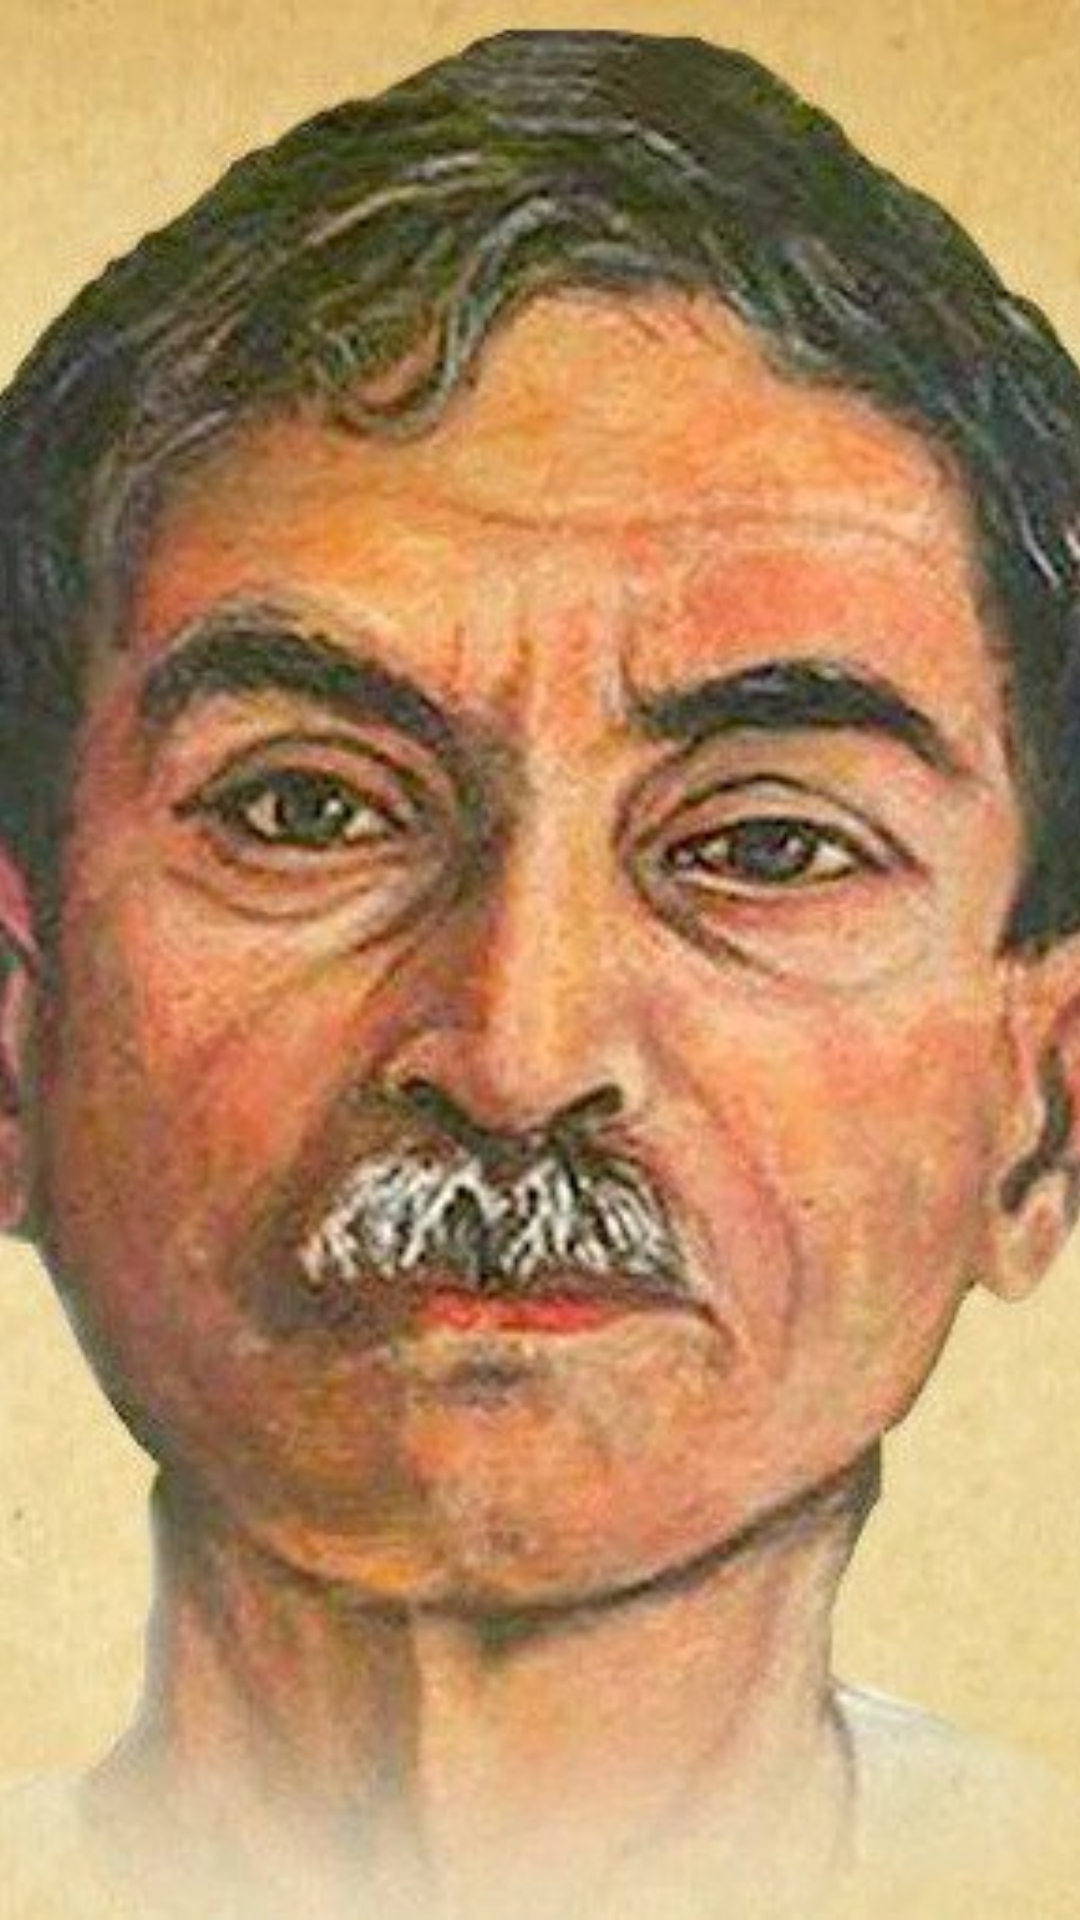 Buy PREMCHAND- God's Share in Stale Rice & Other Stories Book Online at Low  Prices in India | PREMCHAND- God's Share in Stale Rice & Other Stories  Reviews & Ratings - Amazon.in